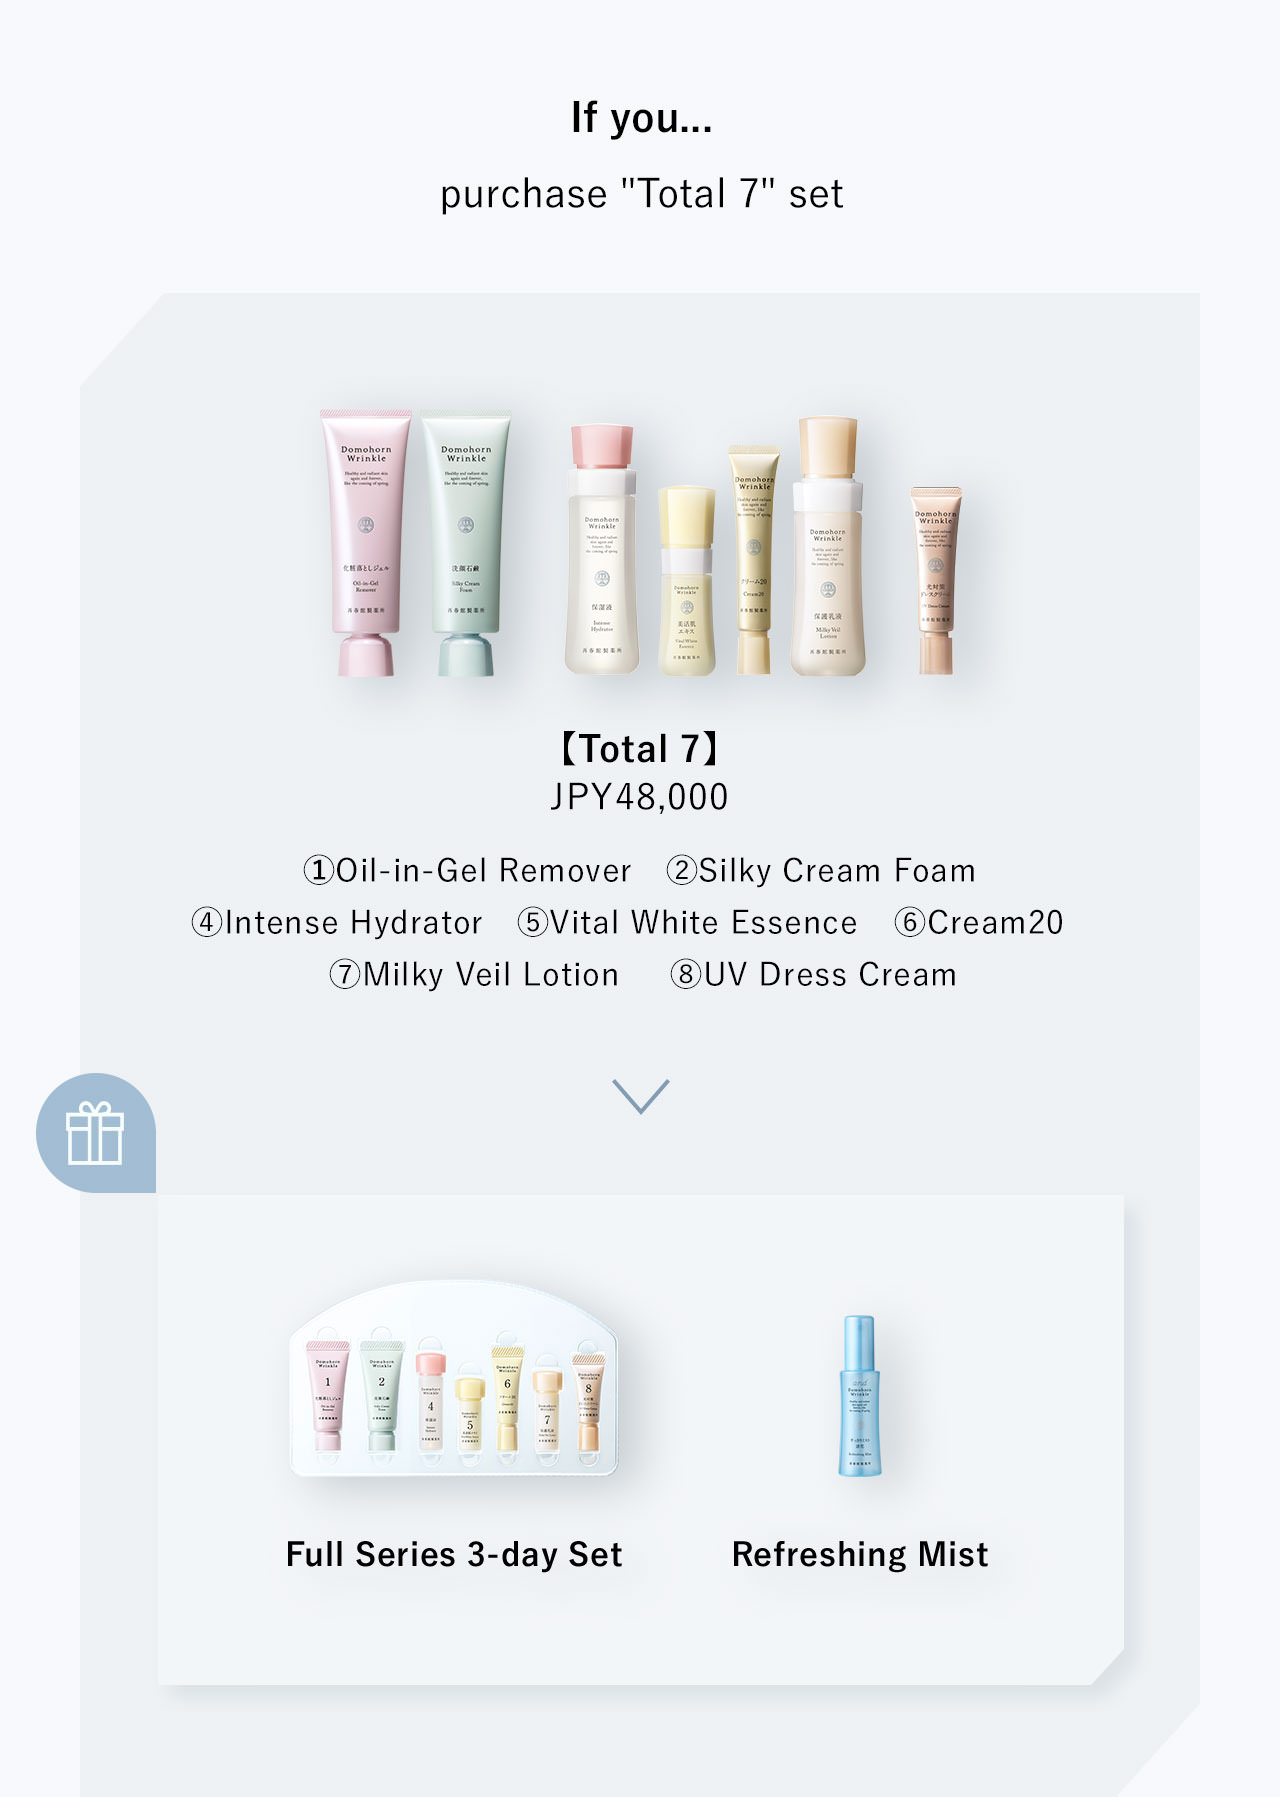 If you... purchase "Total 7" set. You get Full Series 3-day Set and Refreshing Mist.